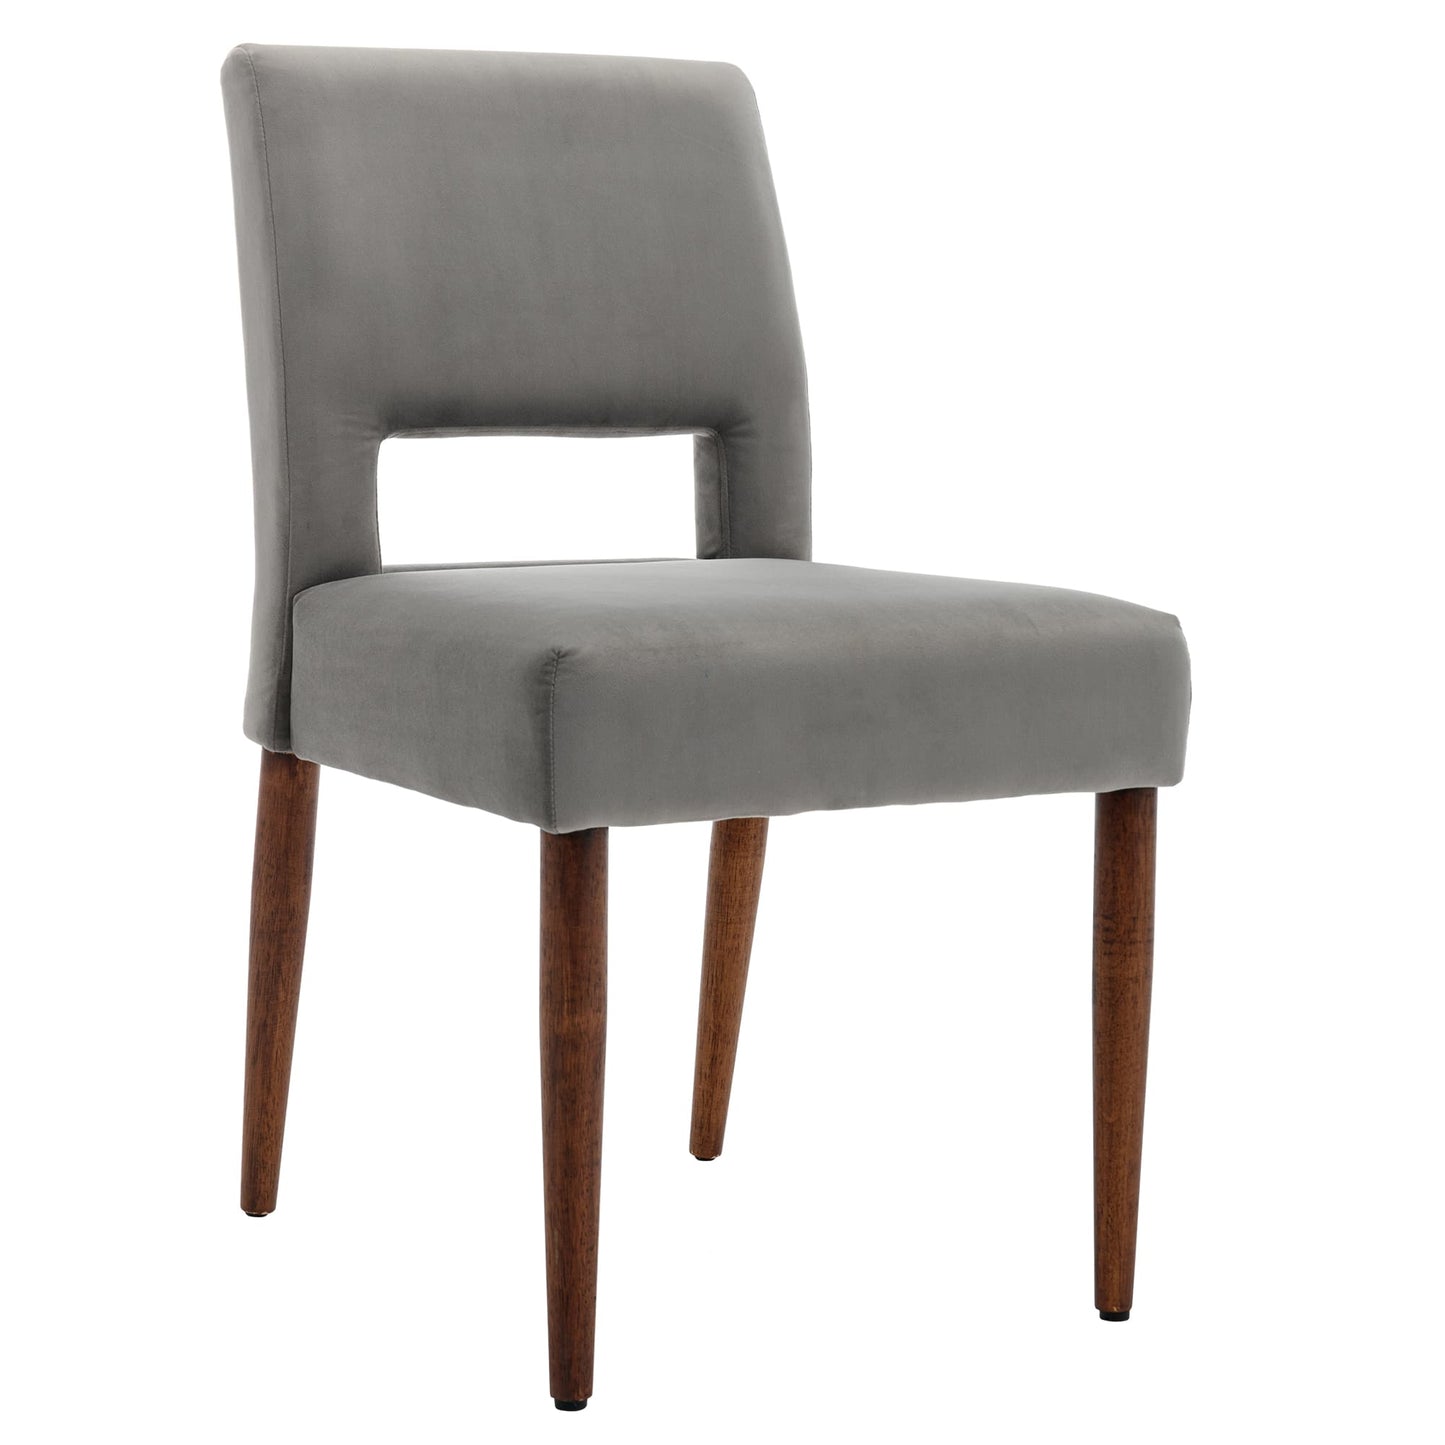 SogesPower Accent Chairs Set of 2, Velvet Chairs with Solid Wood and Upholstered- Grey